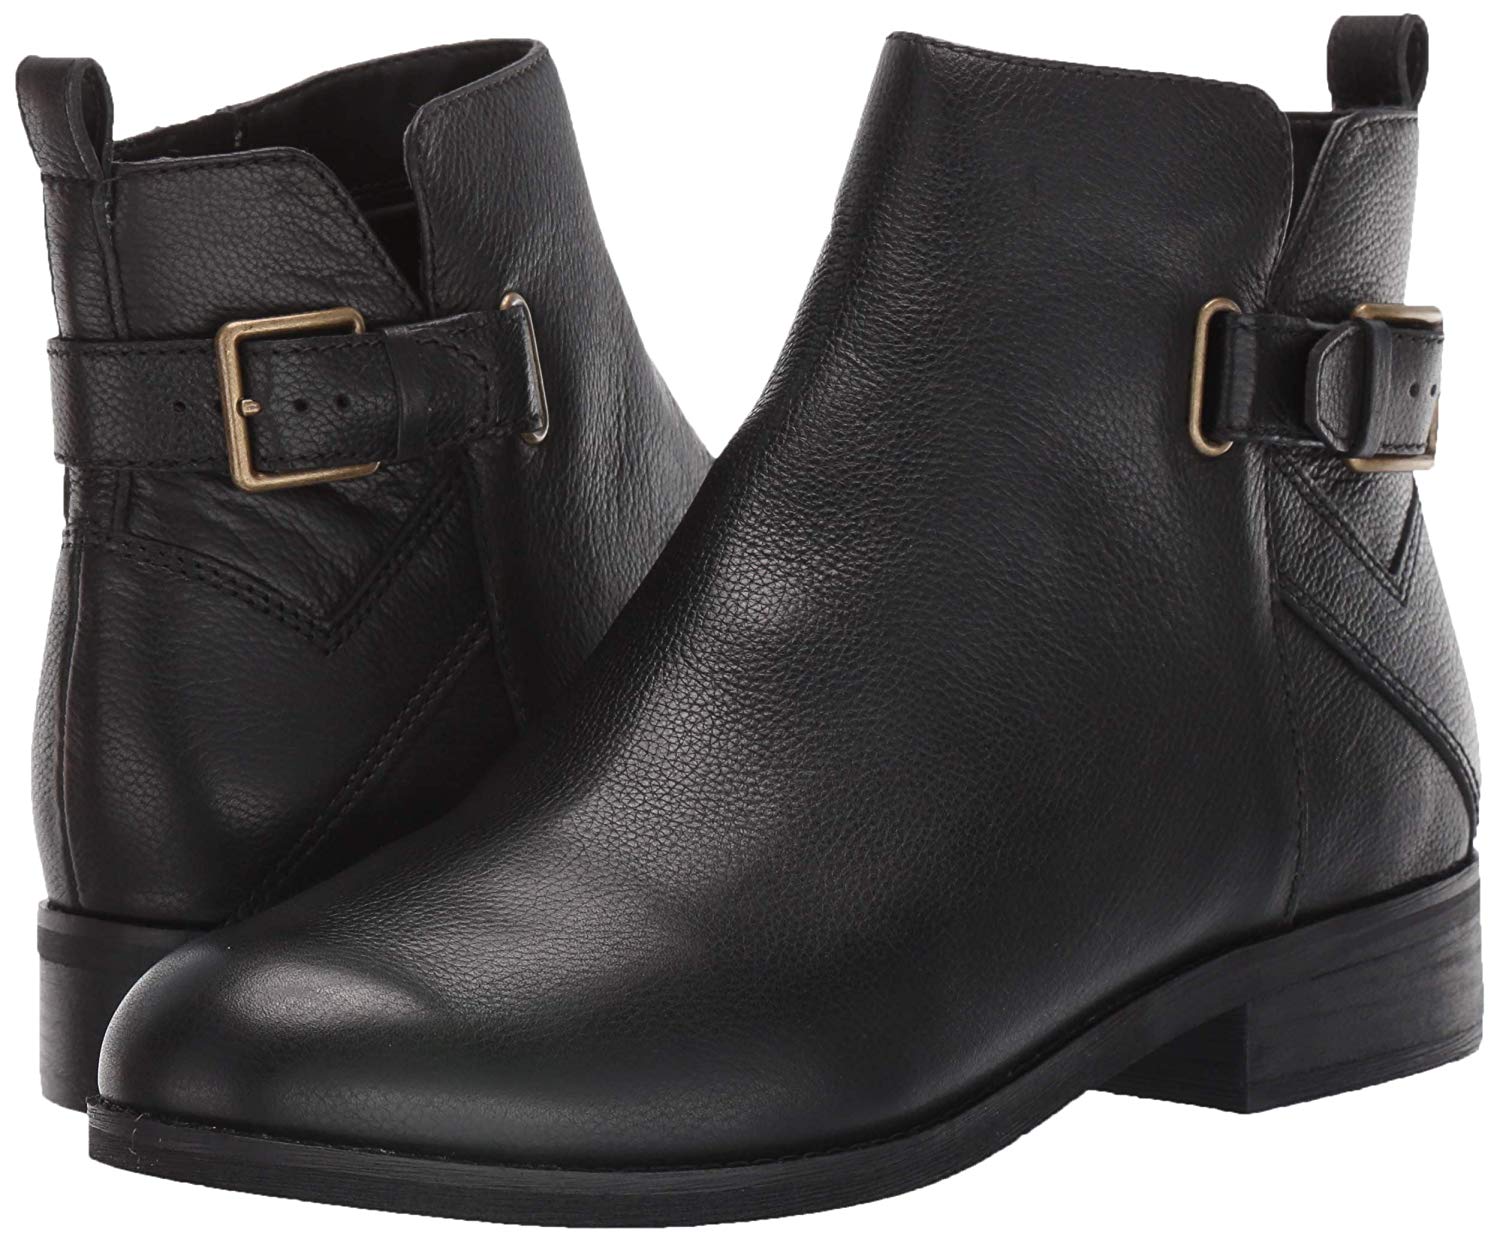 Cole Haan Women's Hollyn Bootie Ankle Boot, Black, Size 8.5 iyEb | eBay